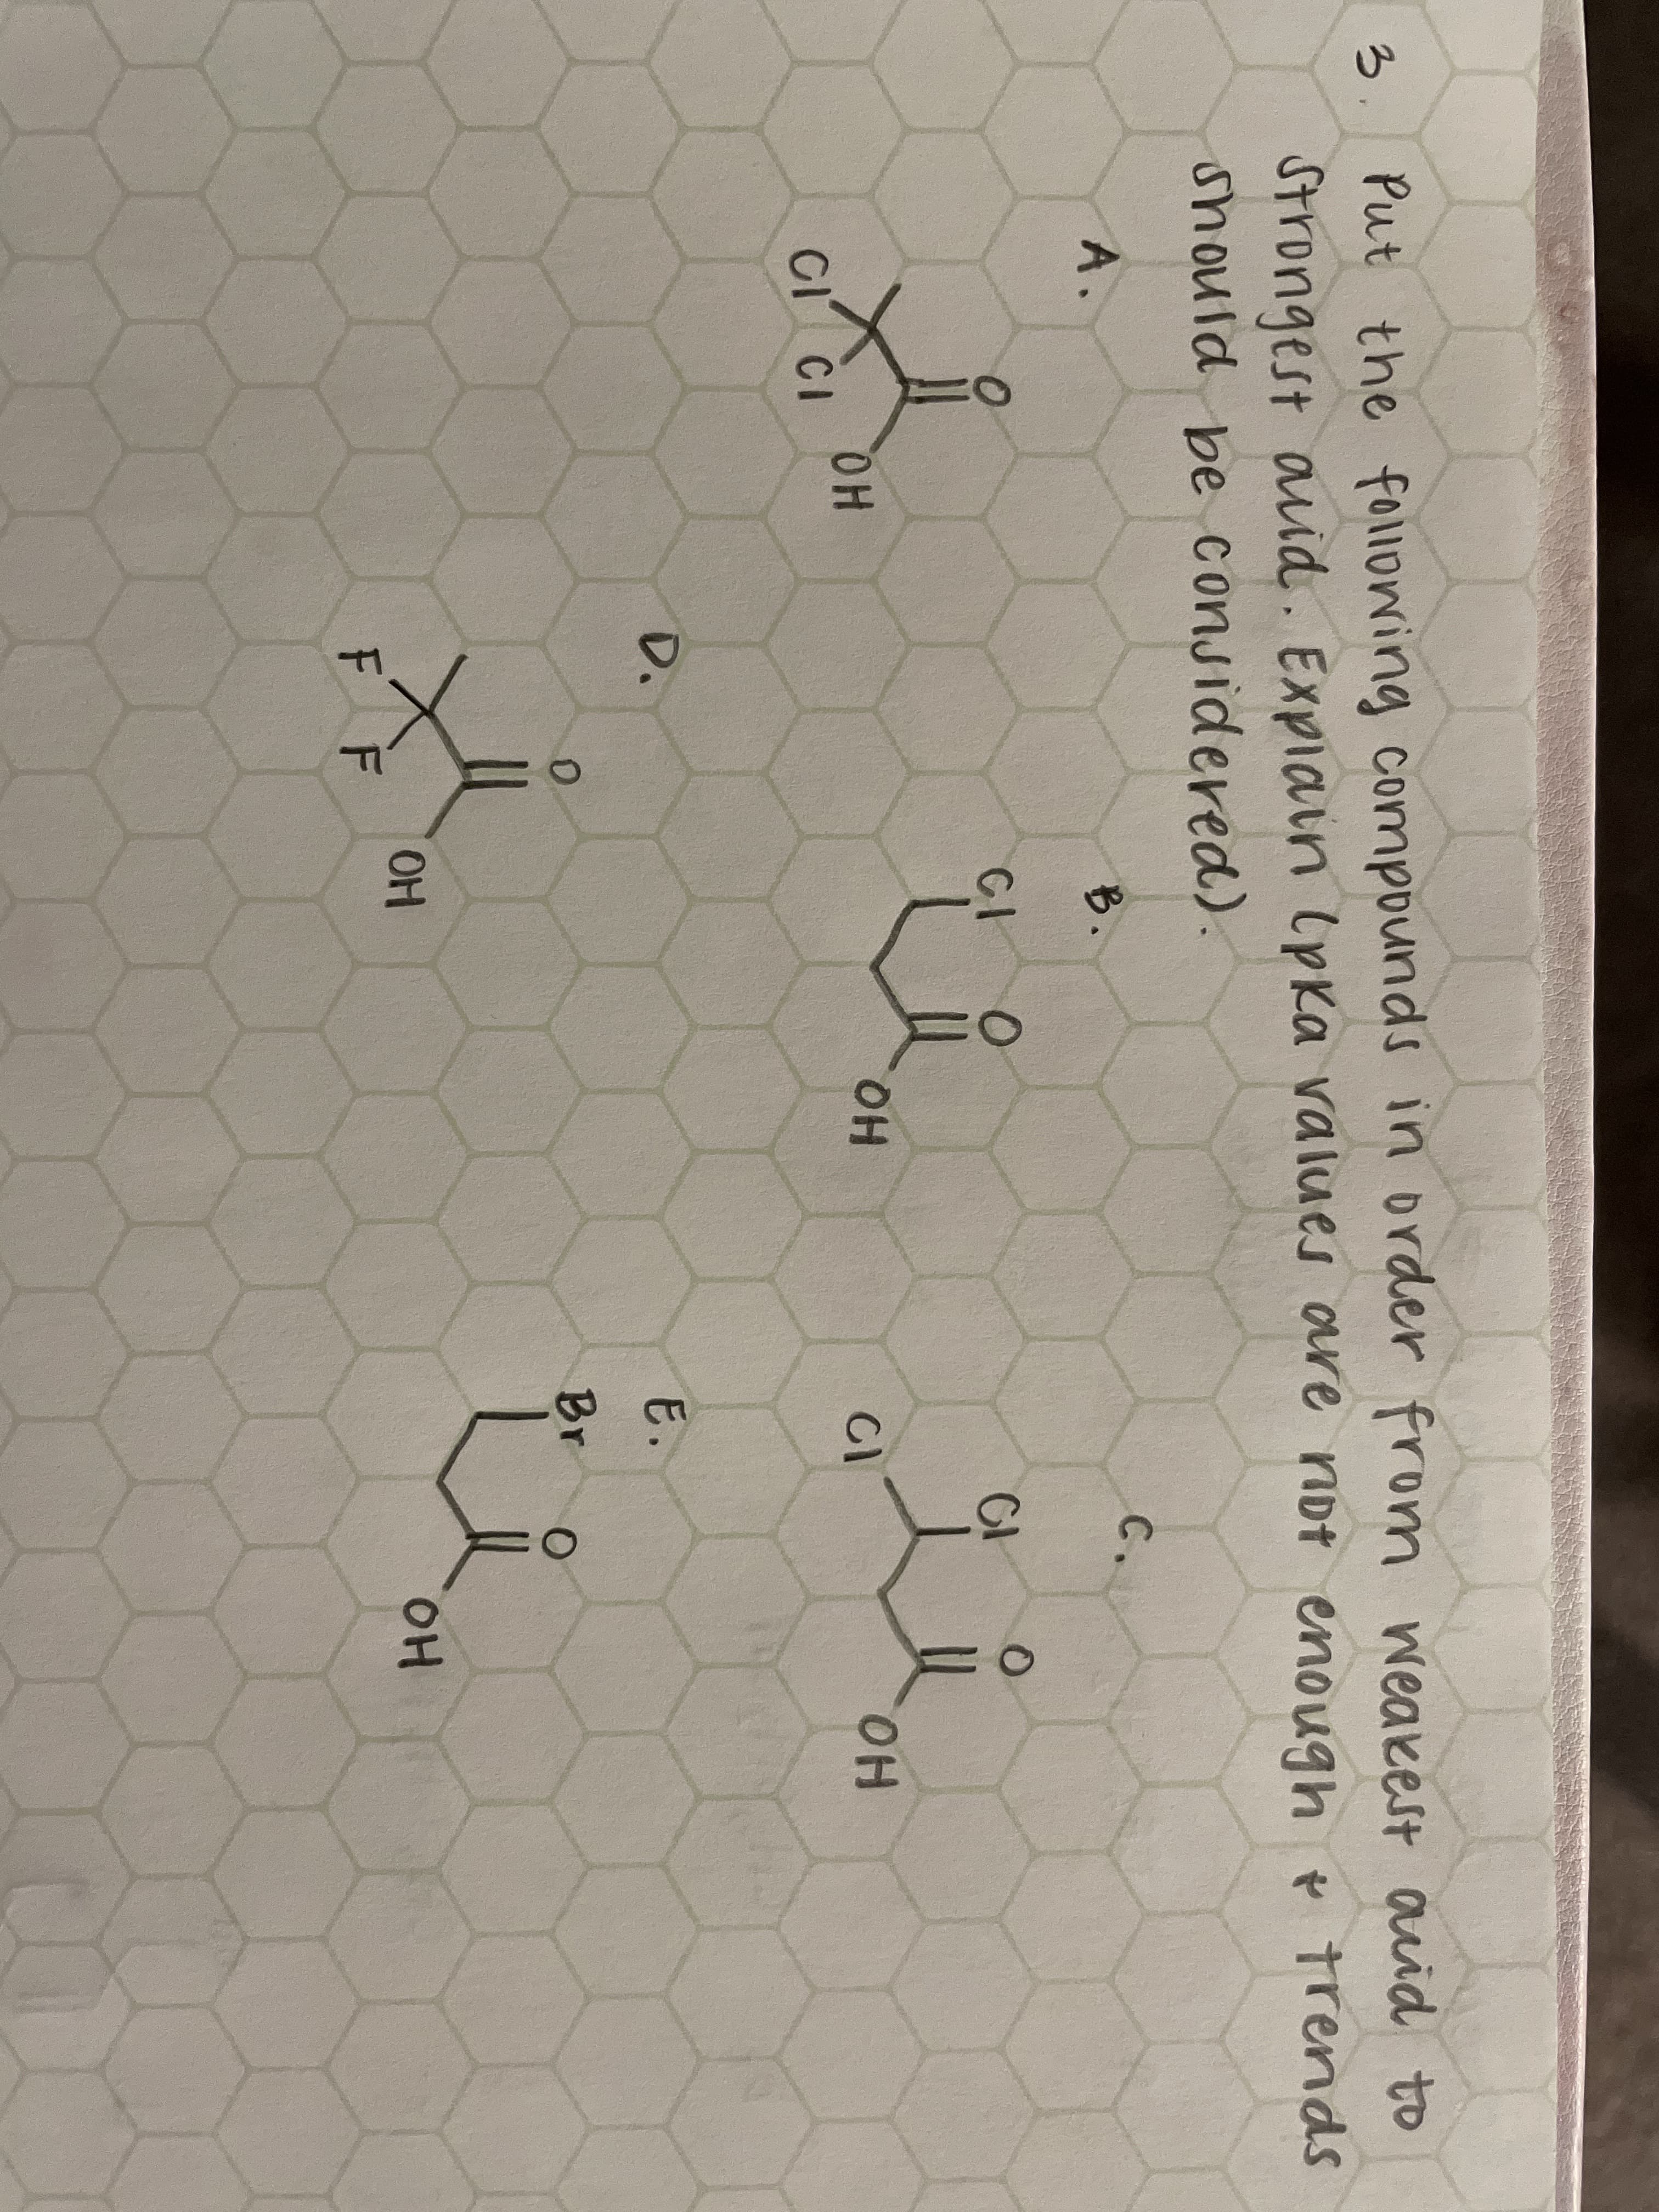 3.
Put the folowing compounds in order fro
m weakest auid to
Strongest auid. Explain (pka values are not enough e trends
should be considered).
A.
B.
C.
CI
OH
HO.
CI CI
CI
HO.
D.
E.
Br
OH
OH
F F
